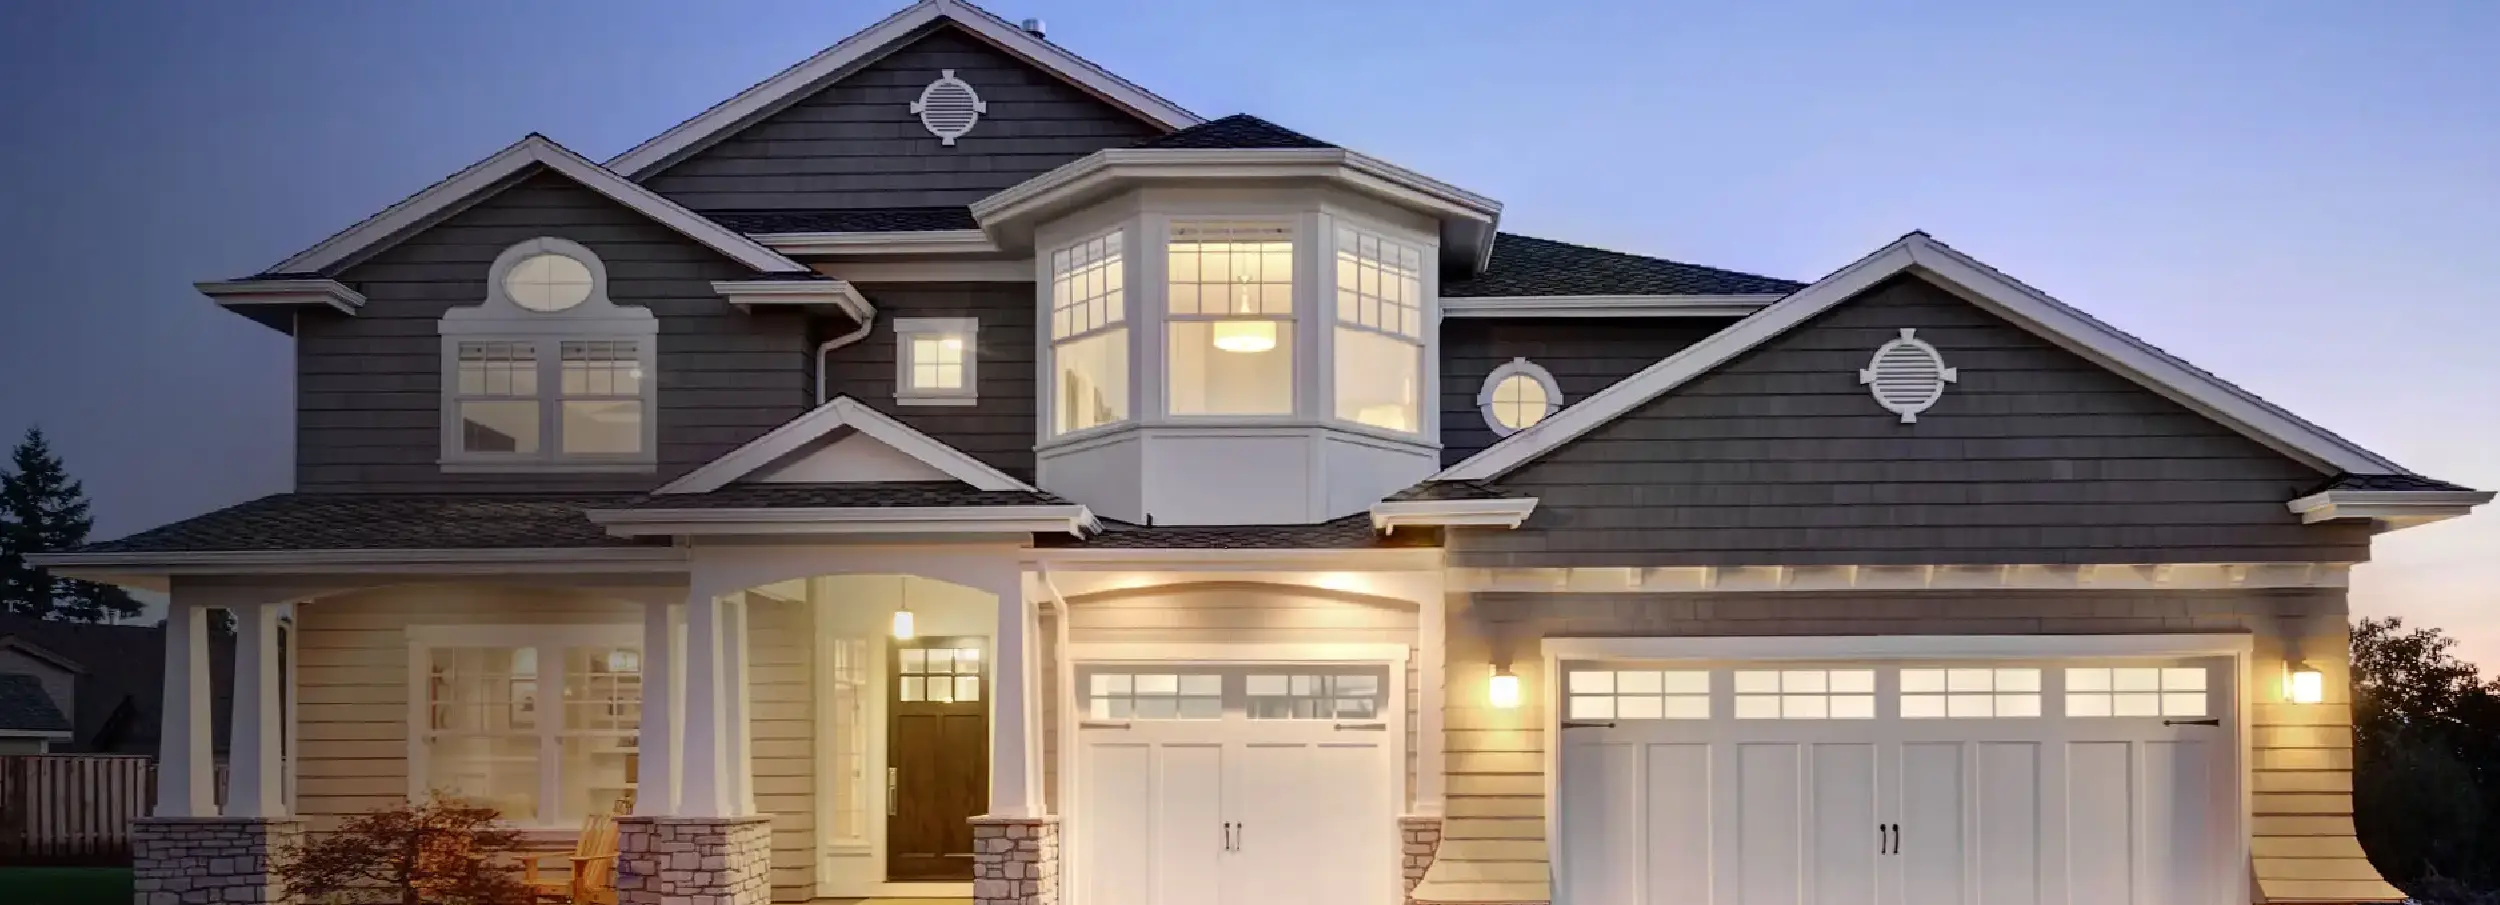 Exterior of a craftsman style home at dusk with outdoor lights on.